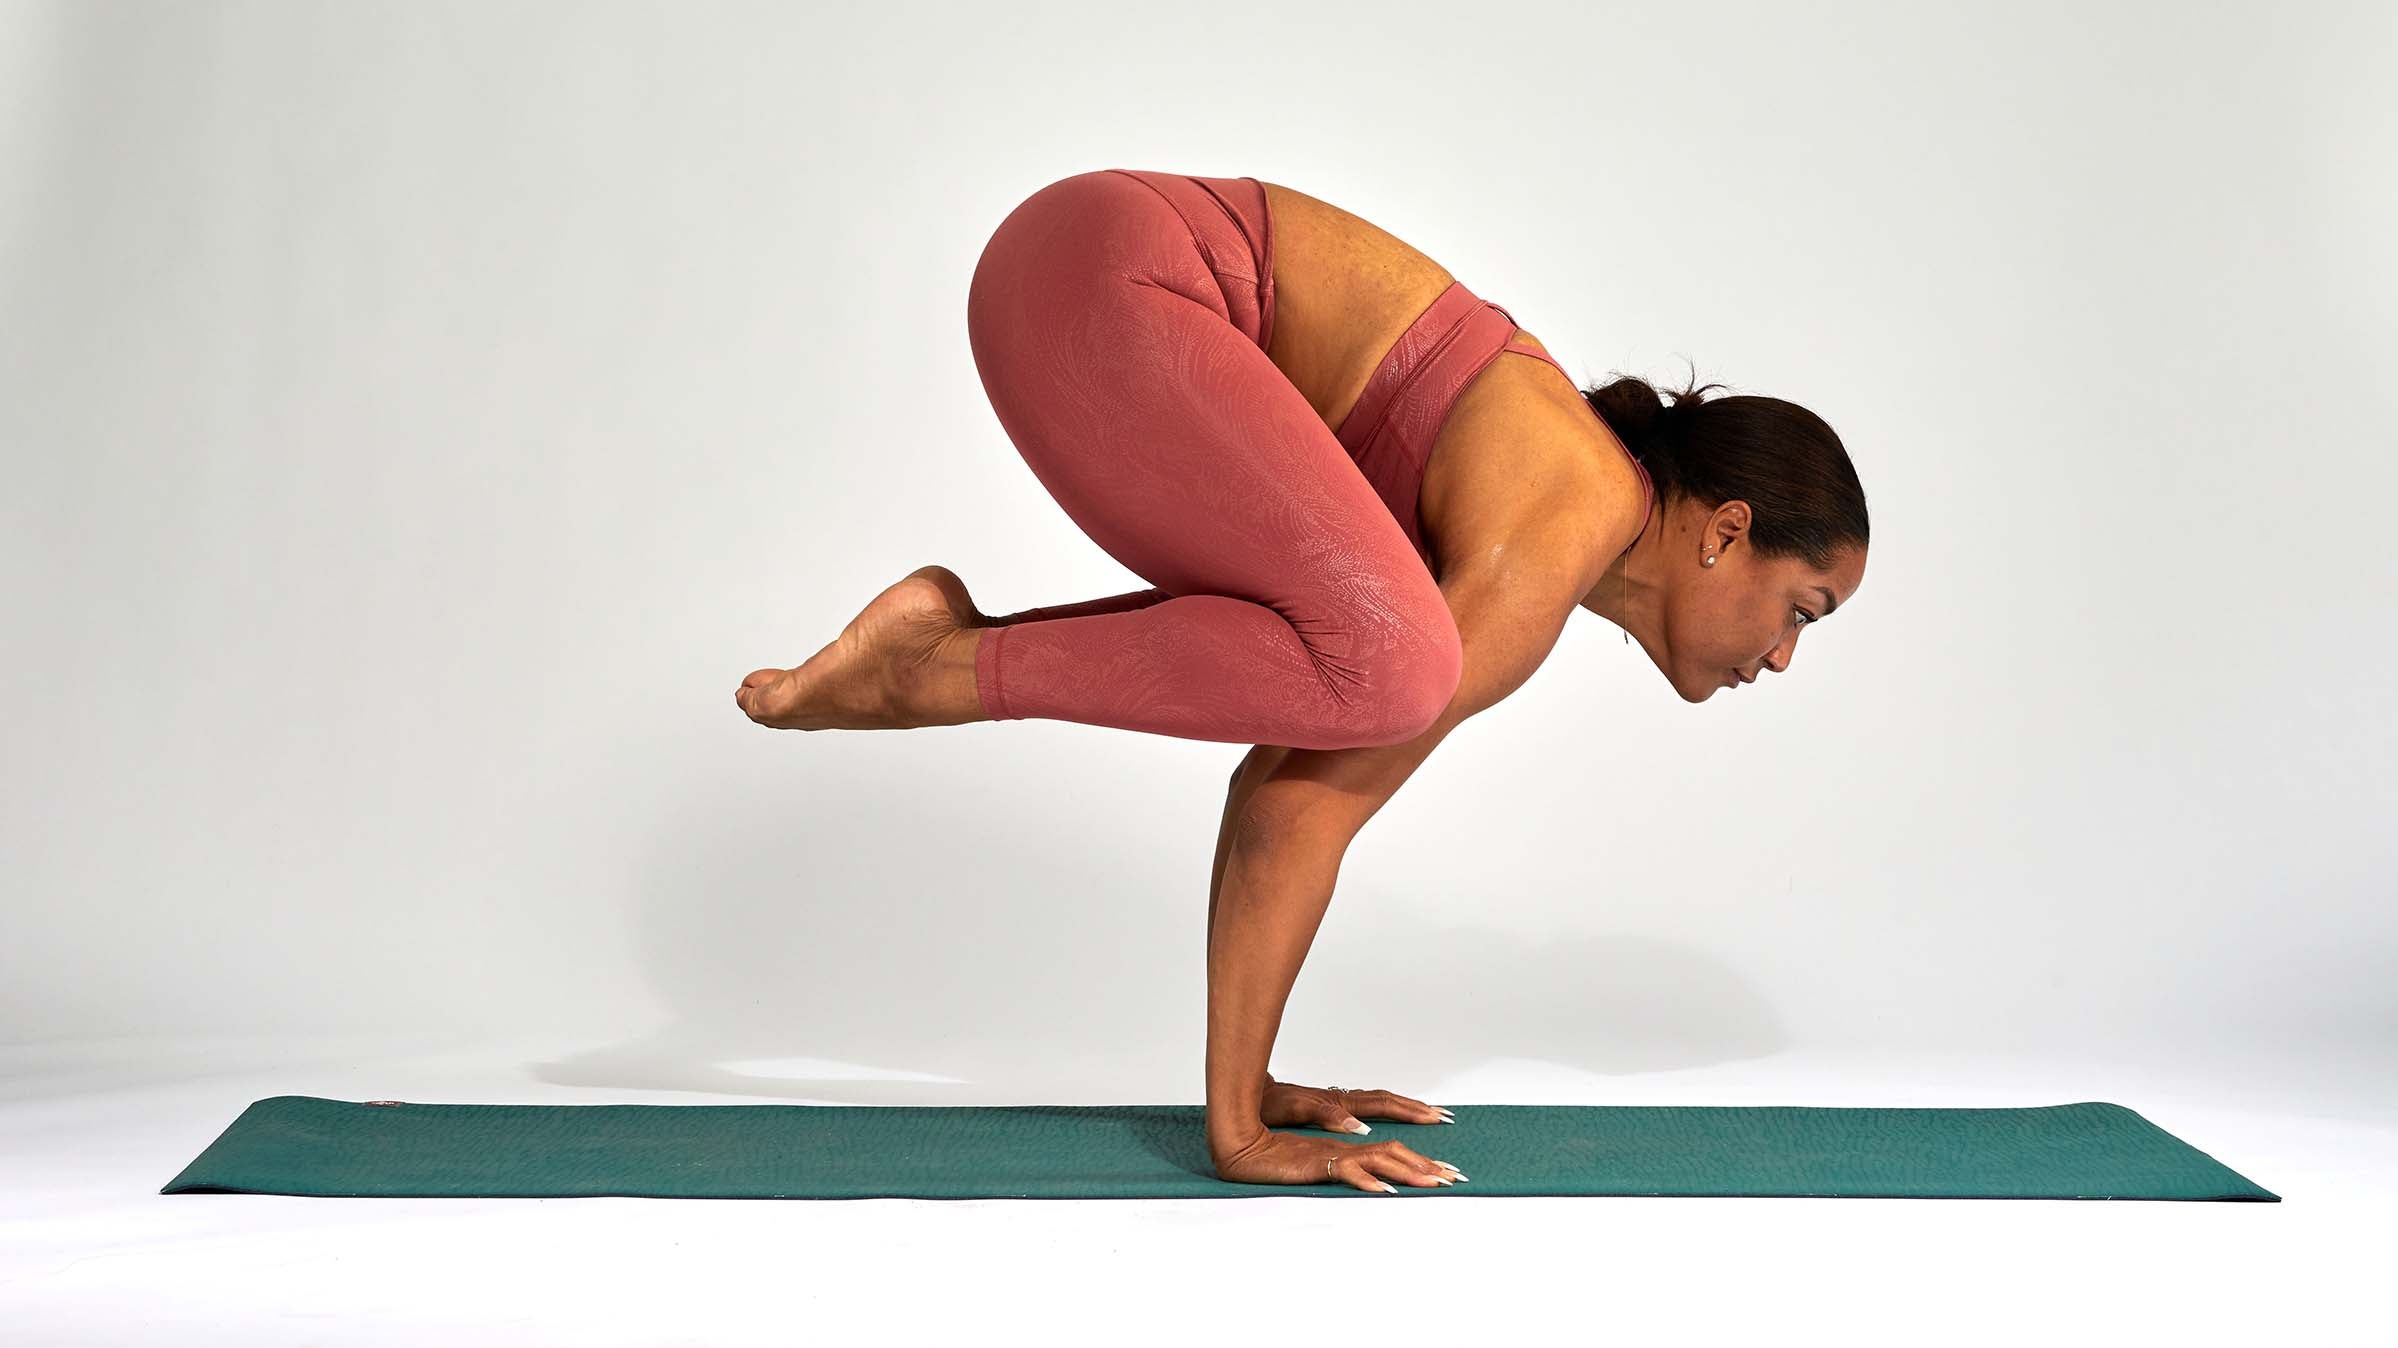 Yoga headstand pose | Yoga postures pictures, Headstand yoga, Headstand  poses